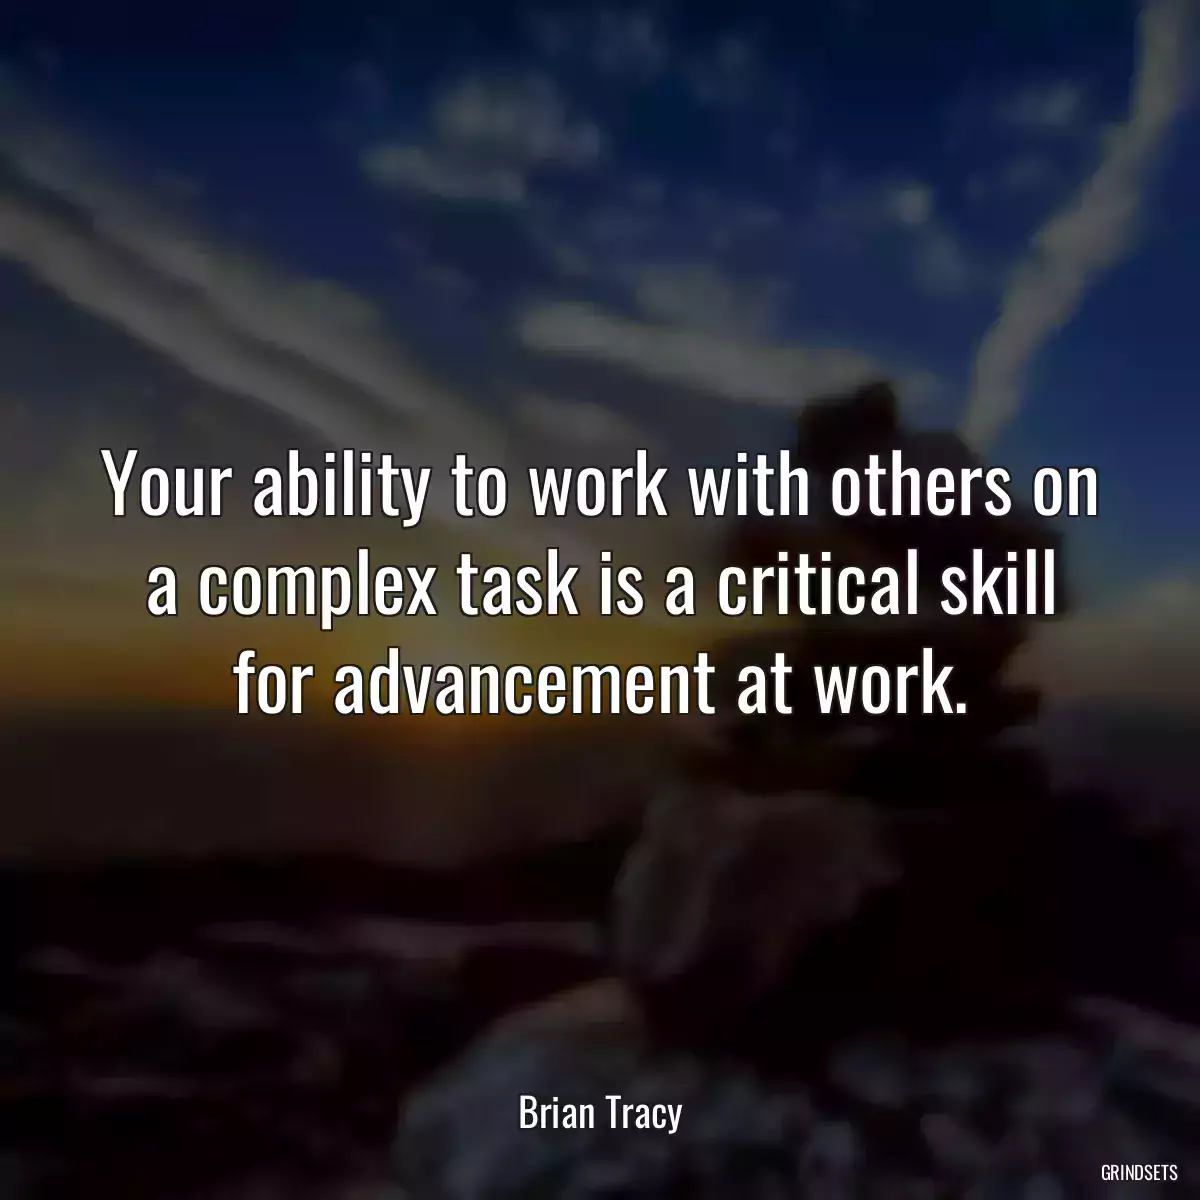 Your ability to work with others on a complex task is a critical skill for advancement at work.